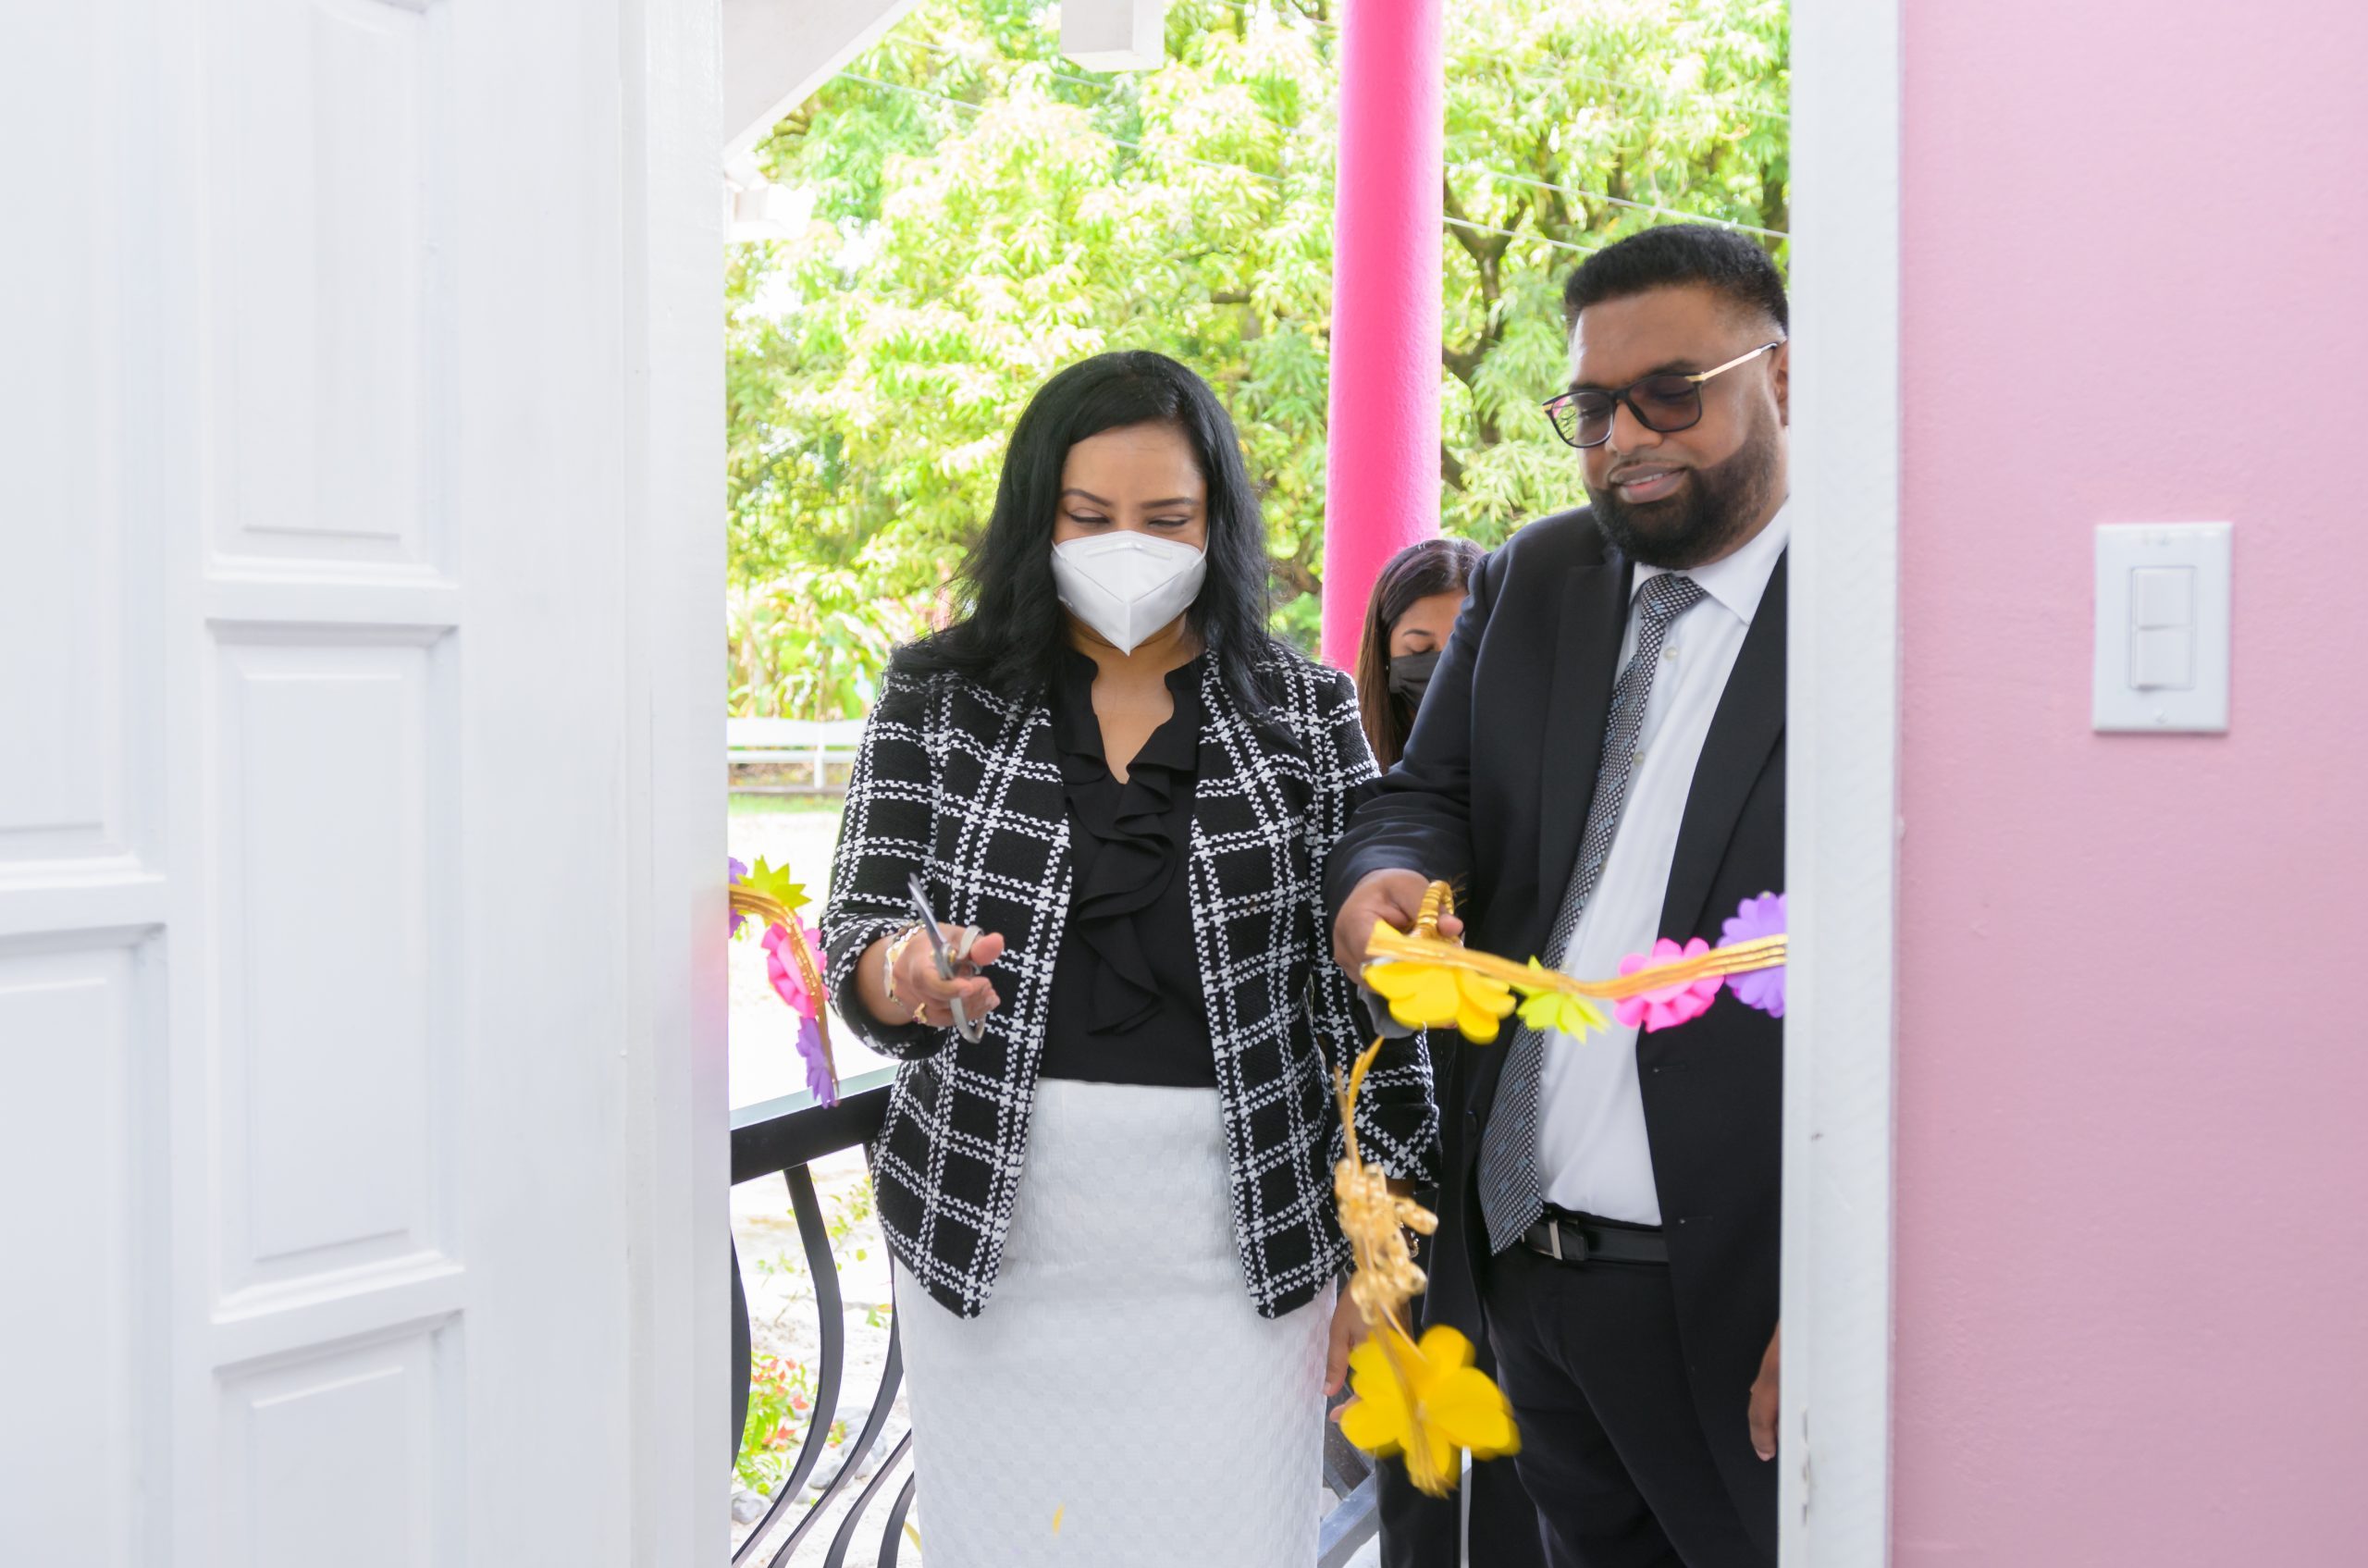 Human Services and Social Security Minister, Dr. Vindhya Persaud and President Irfaan Ali cut the ceremonial ribbon at the launch of the new business incubator and mobile app (Delano Williams photo)